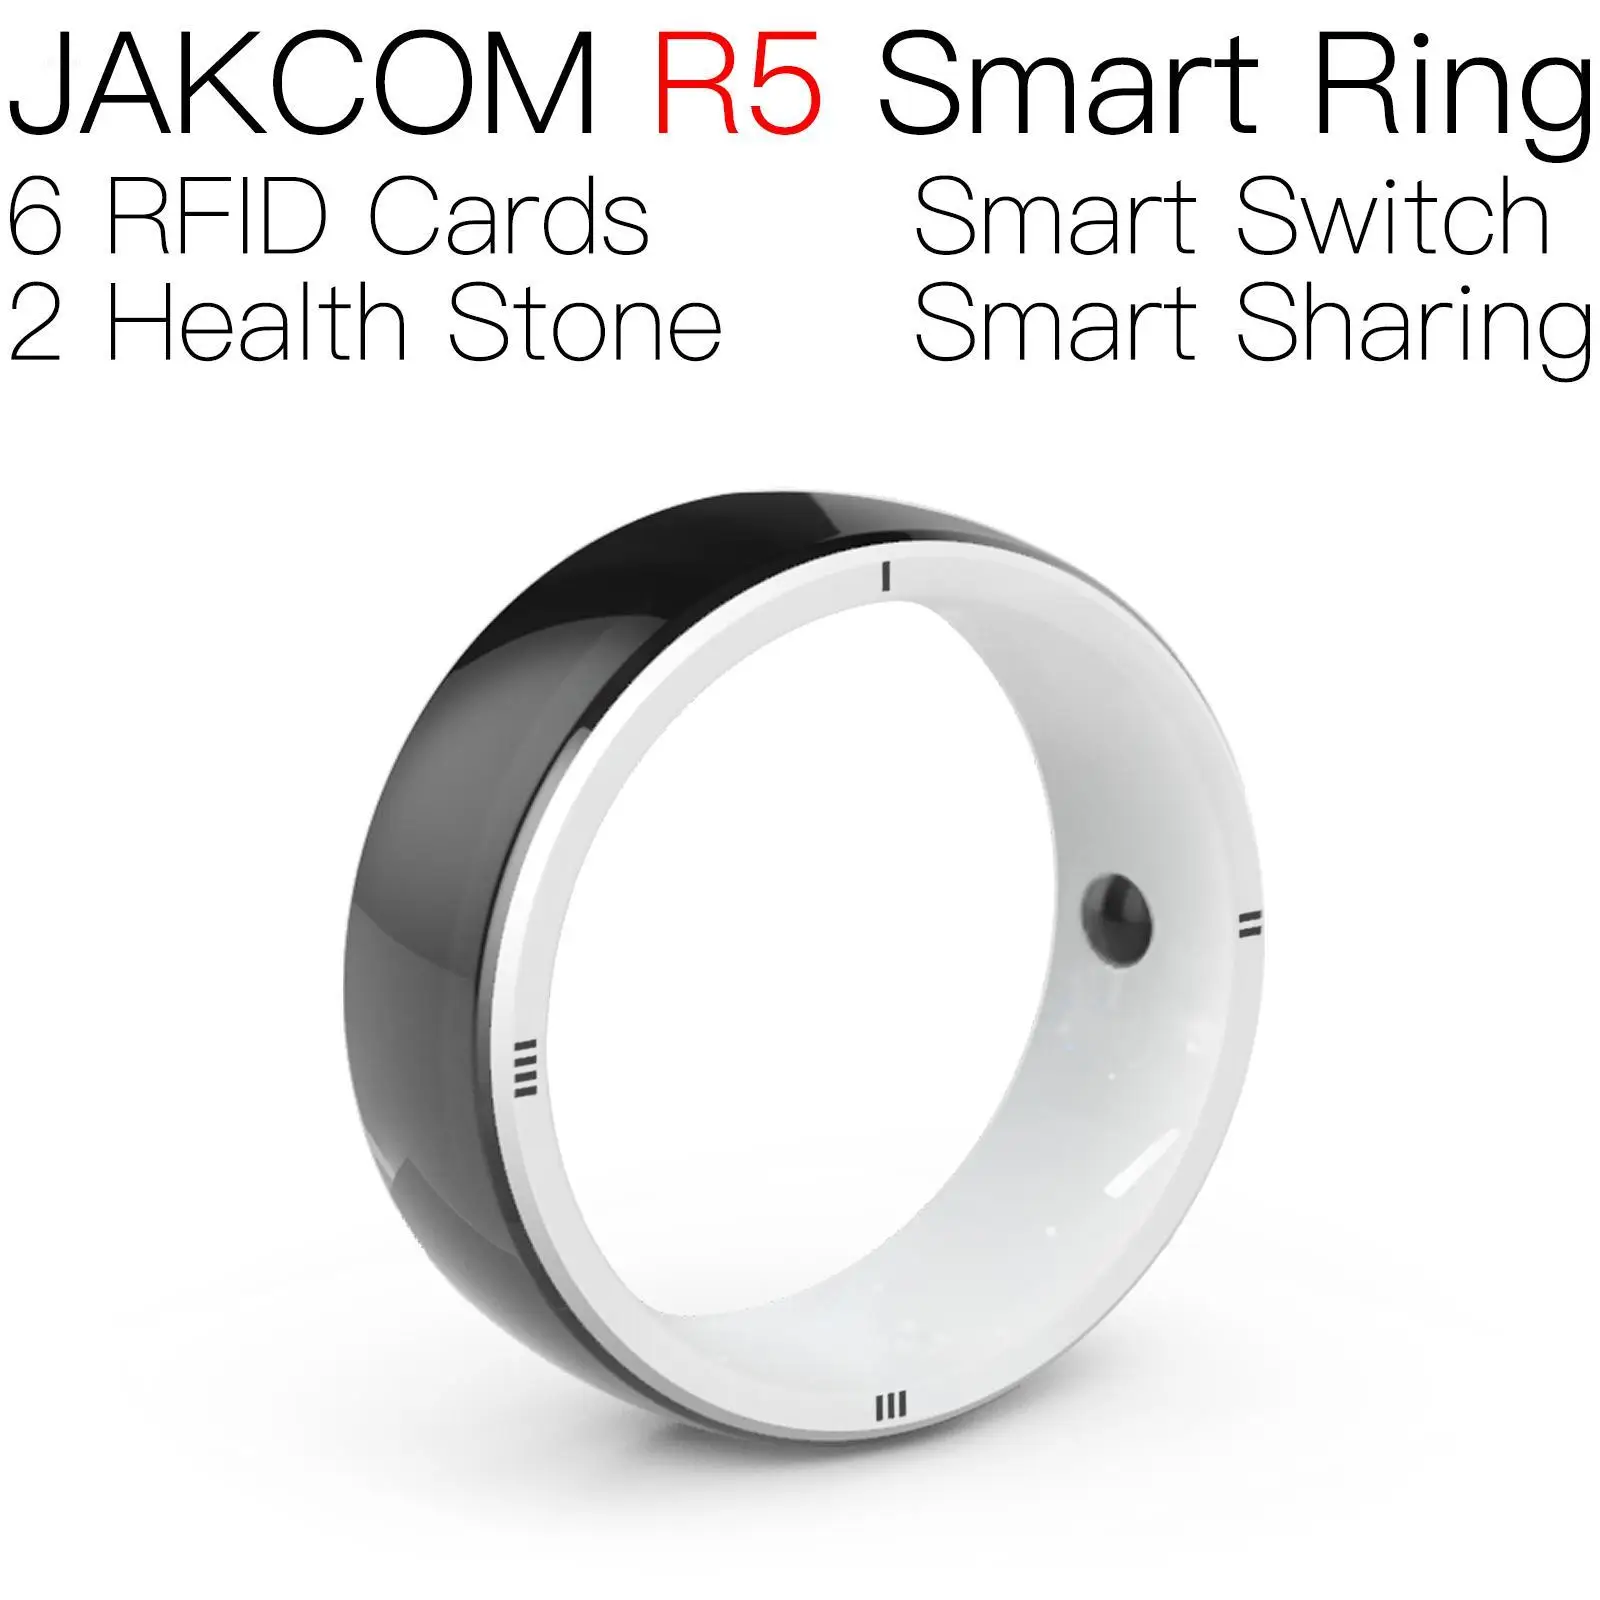 

JAKCOM R5 Smart Ring Super value than stickers the wall id chip carte amiboo new horizons agnes nfc key ring